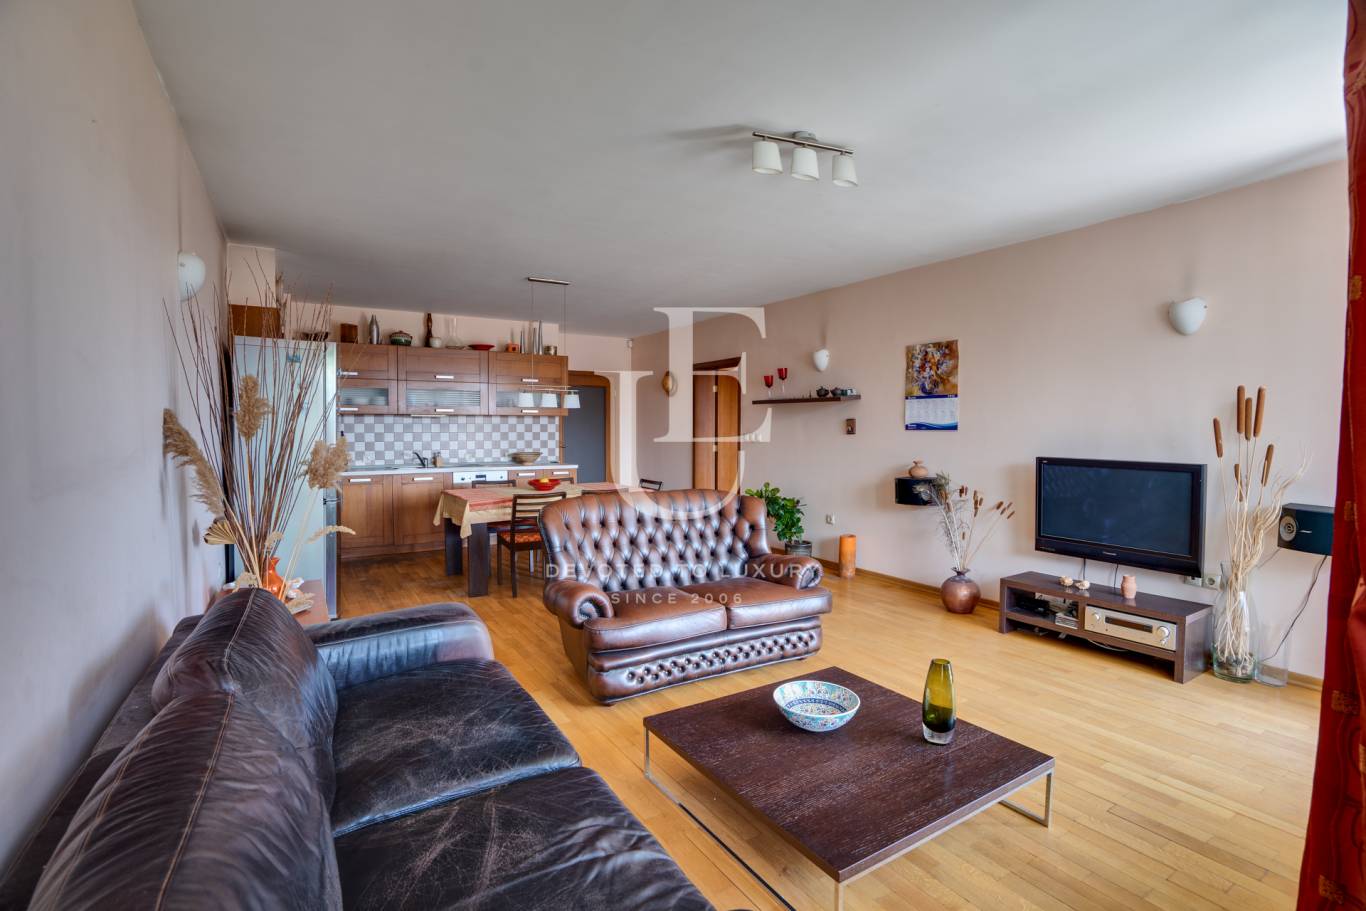 Apartment for sale in Sofia, Lozenets with listing ID: K6754 - image 1